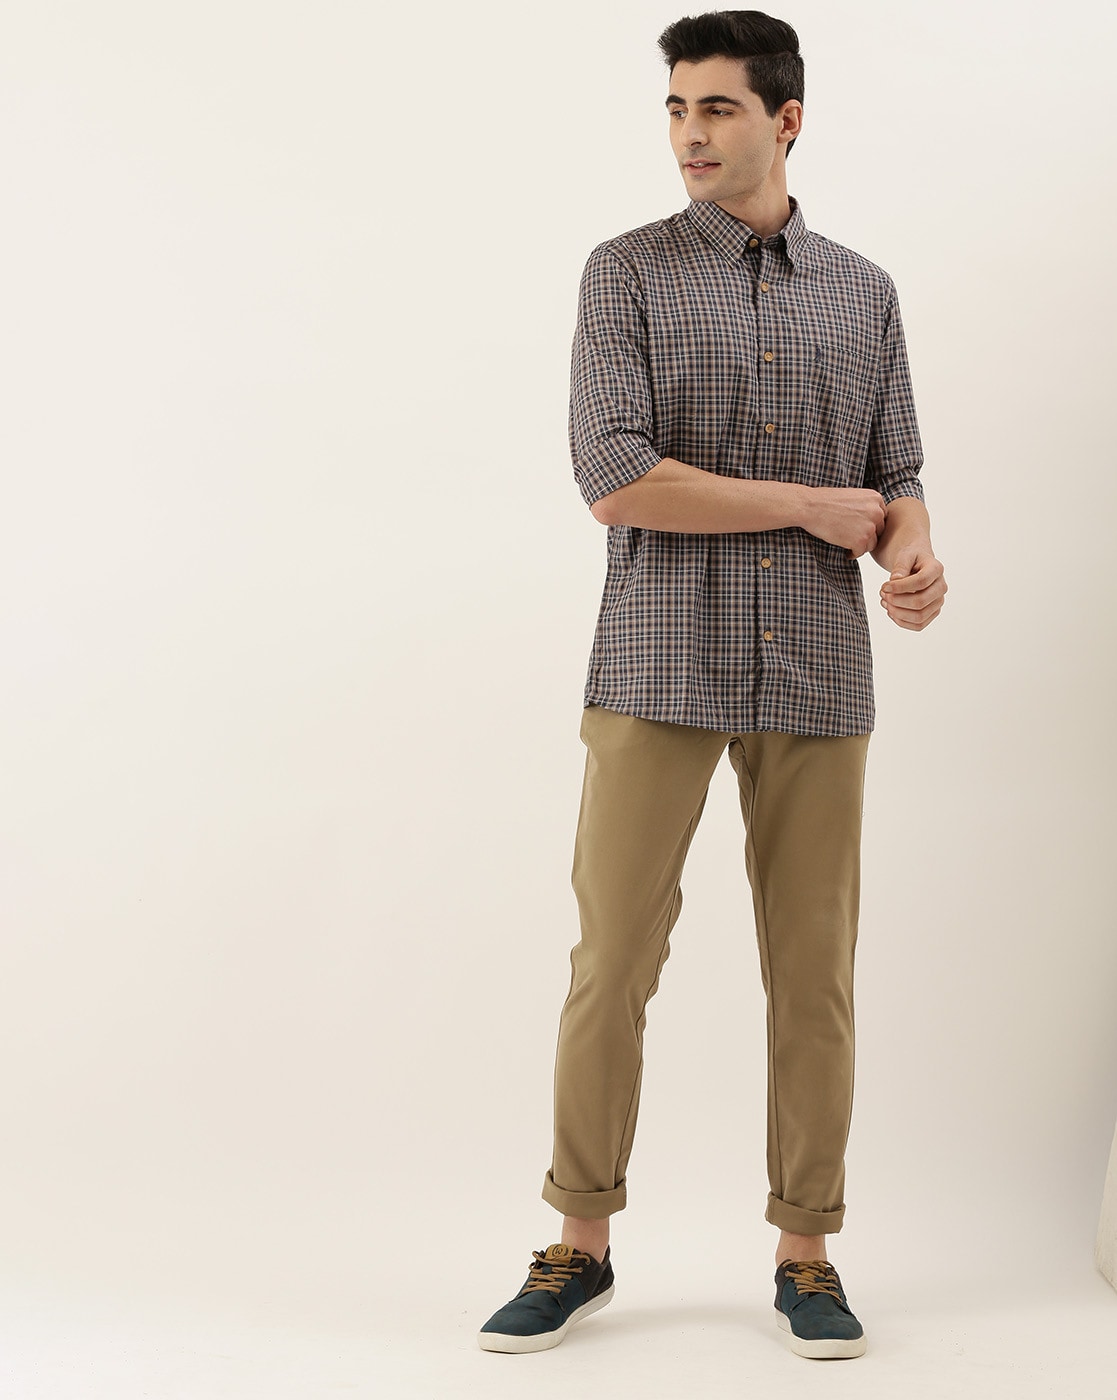 What Colour Shirts To Wear With Green Pants 7 Foolproof Options